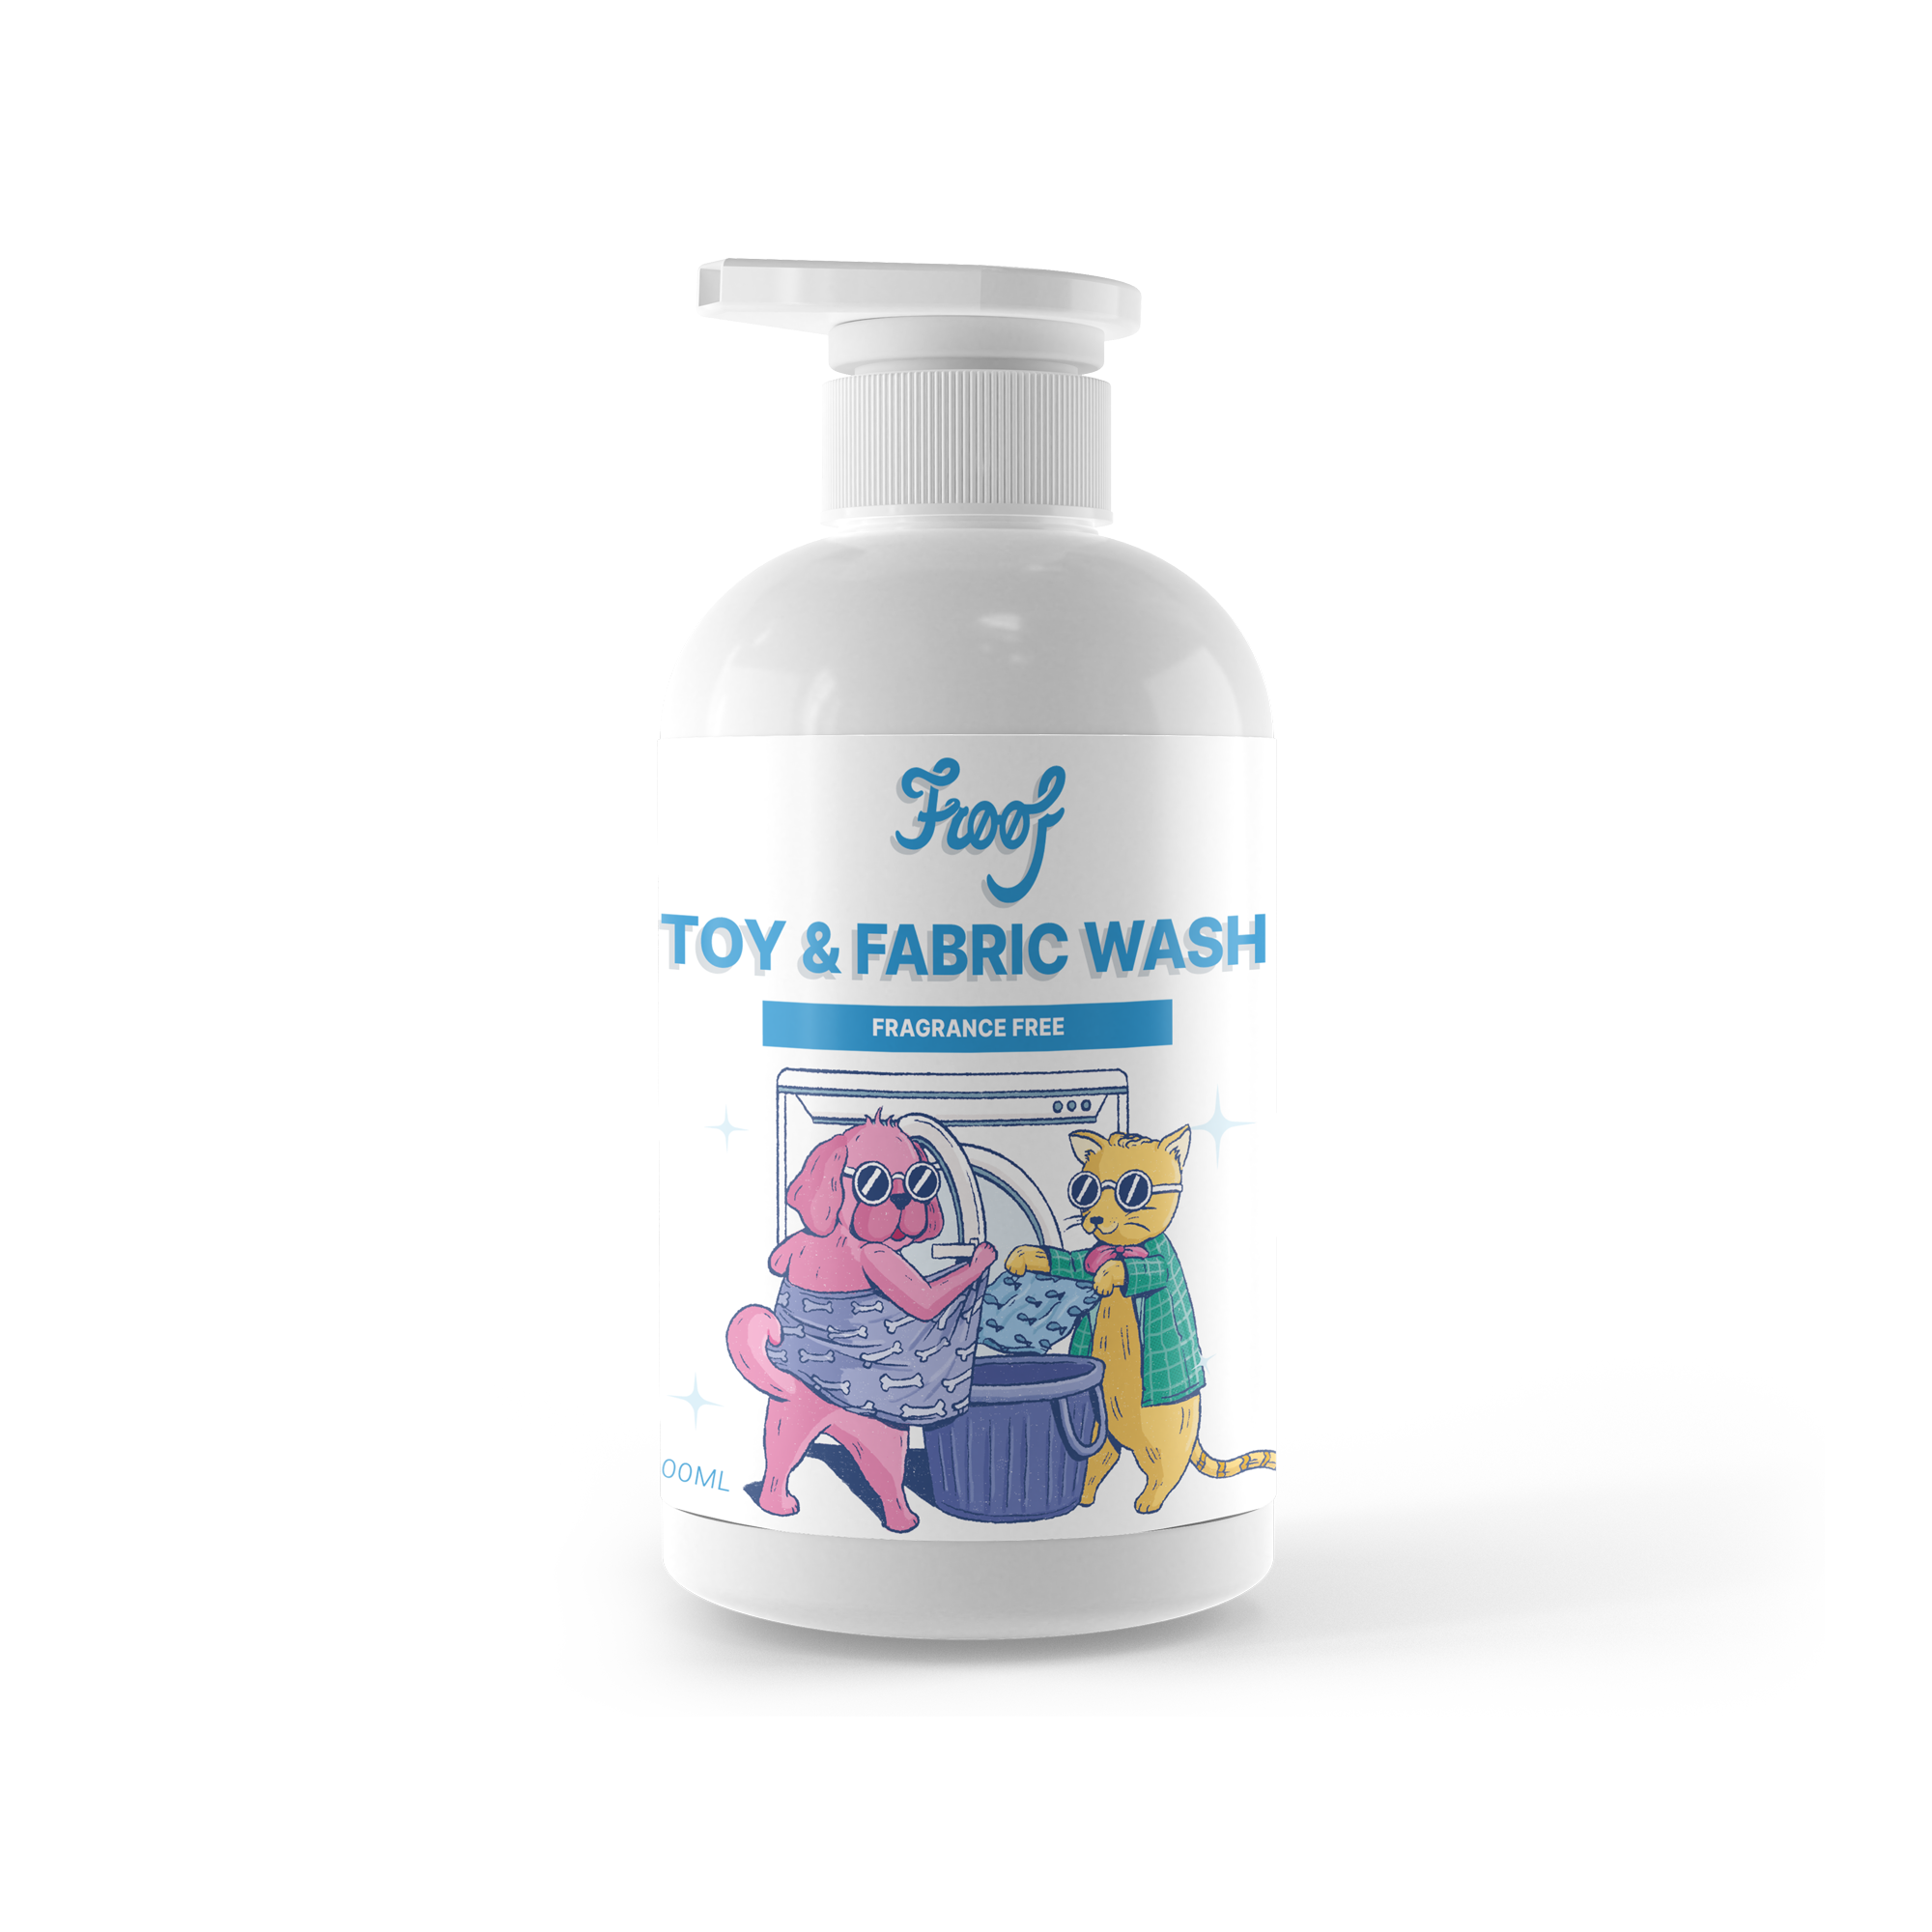 Froof Toy & Fabric Wash - Fragrance Free